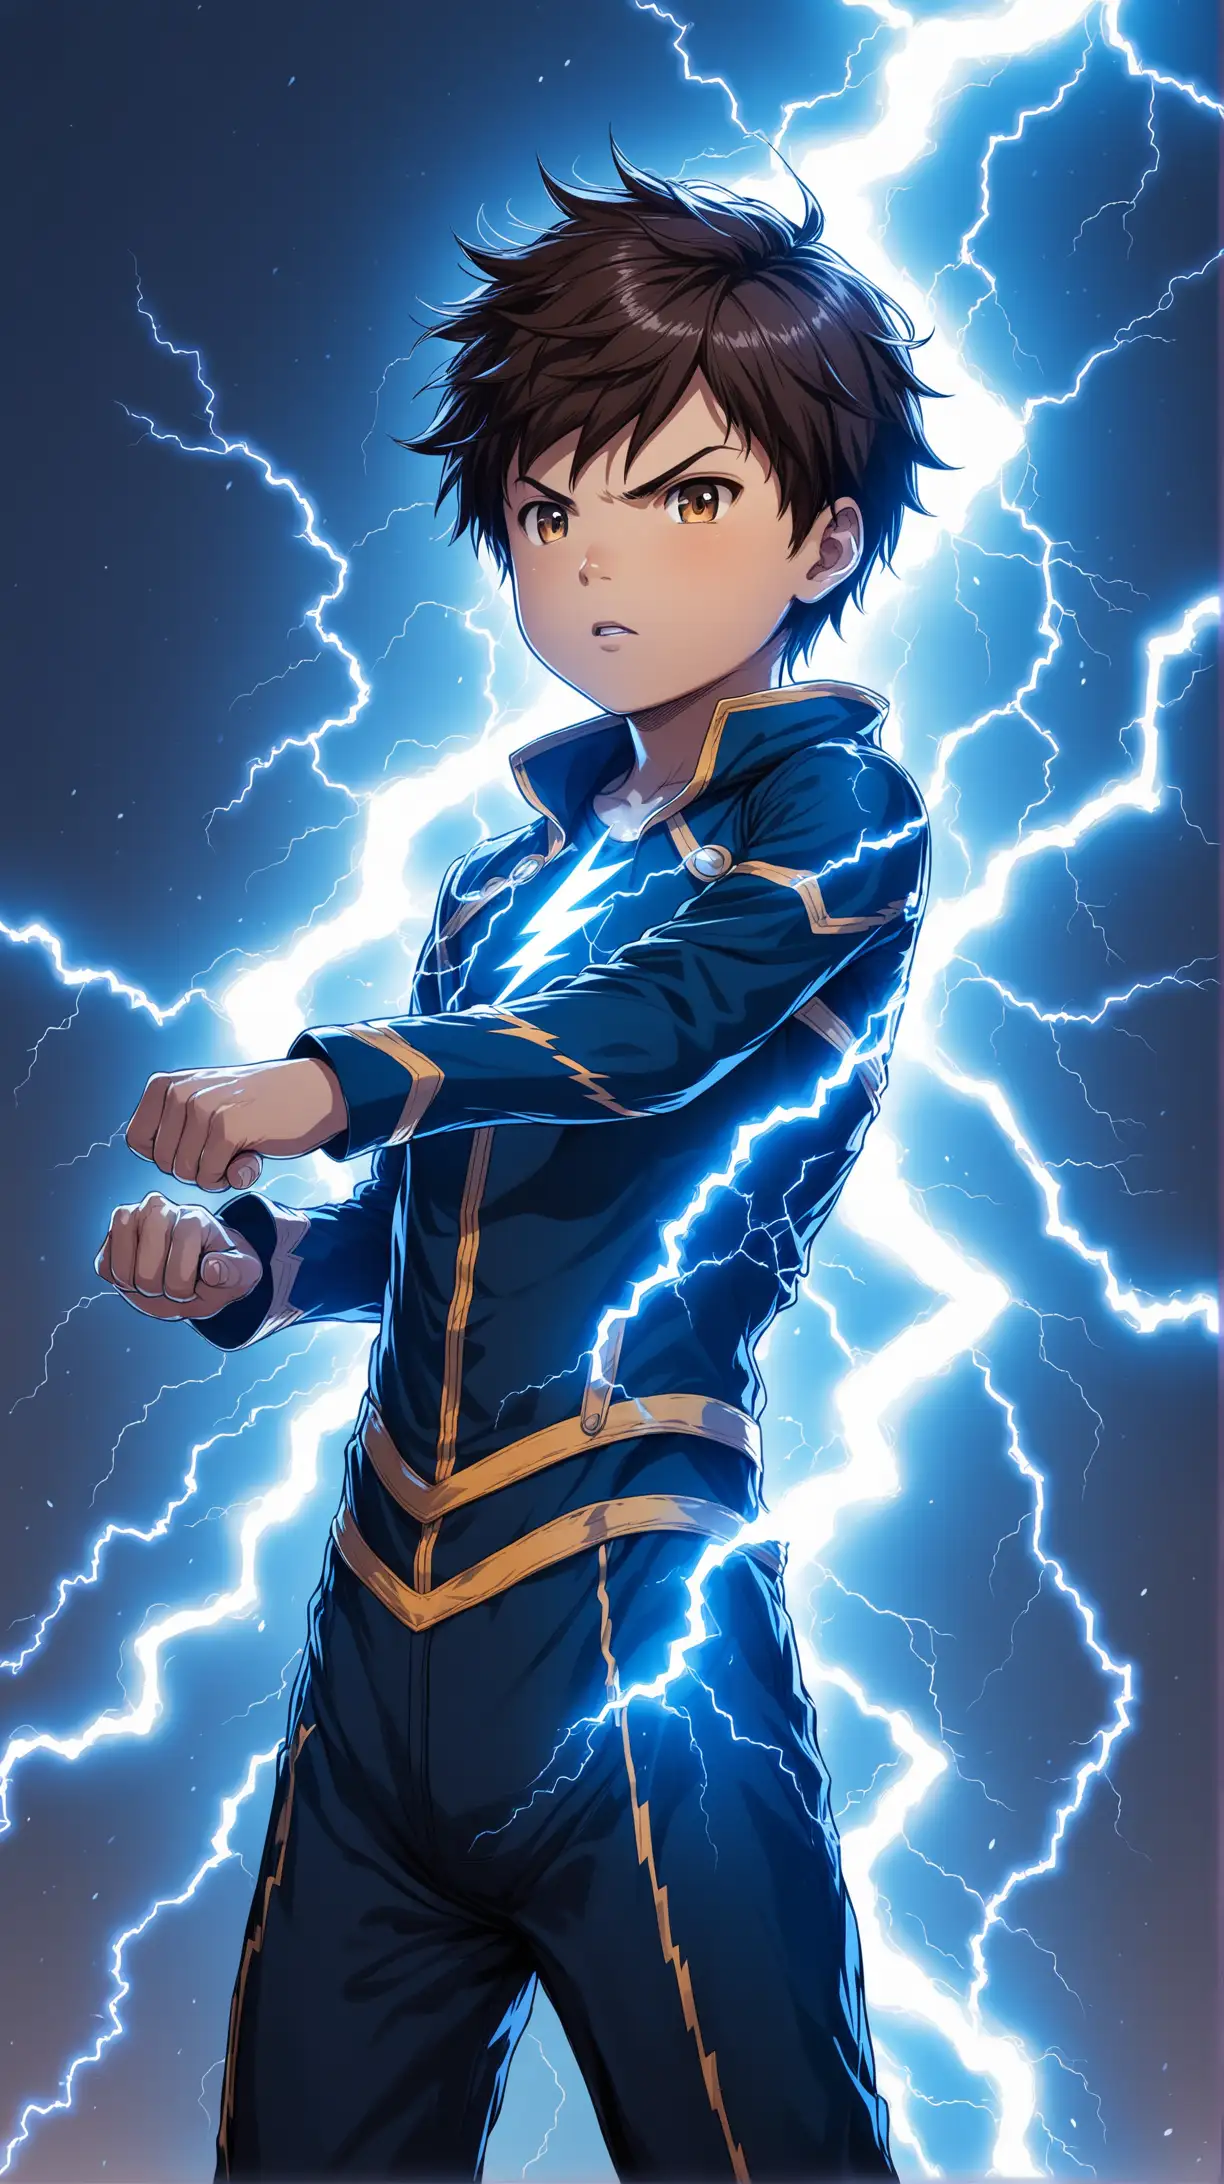 a young boy with lightning powers